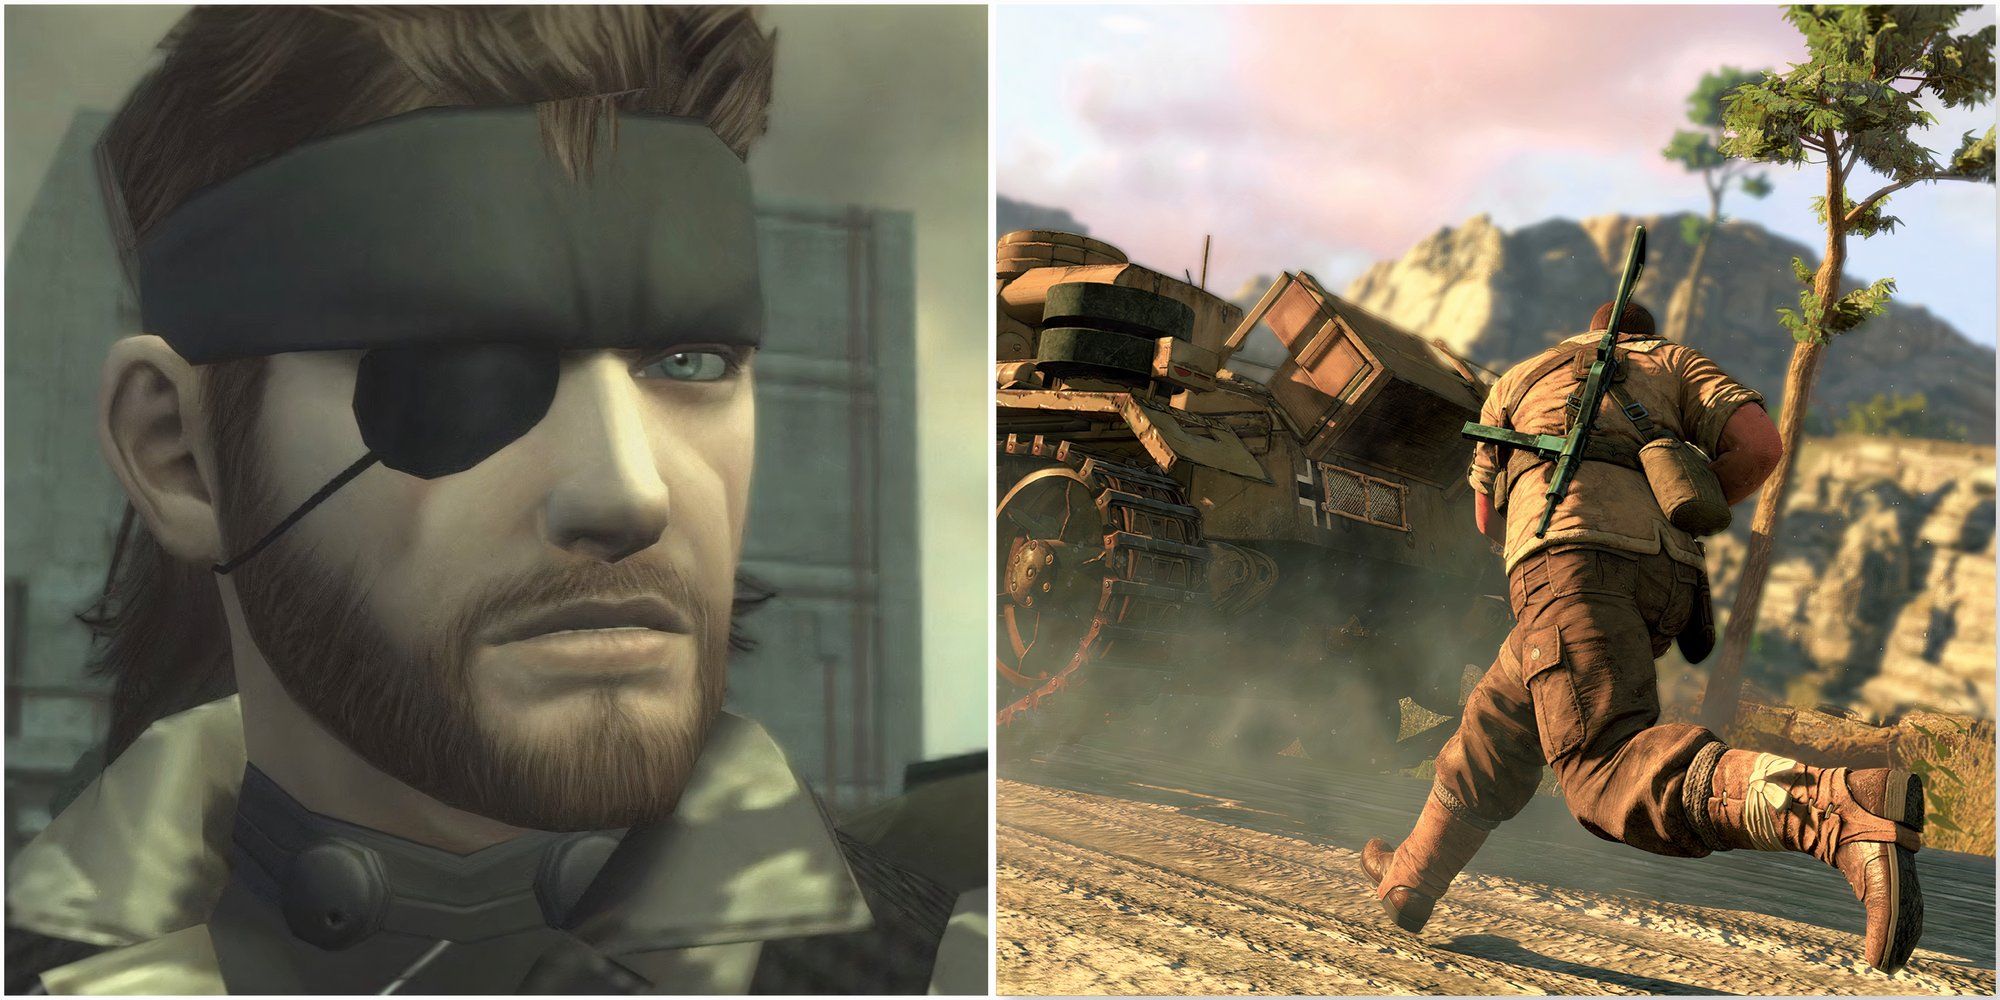 Big Boss in Metal Gear Solid 3 and Chasing a tank in Sniper Elite 3